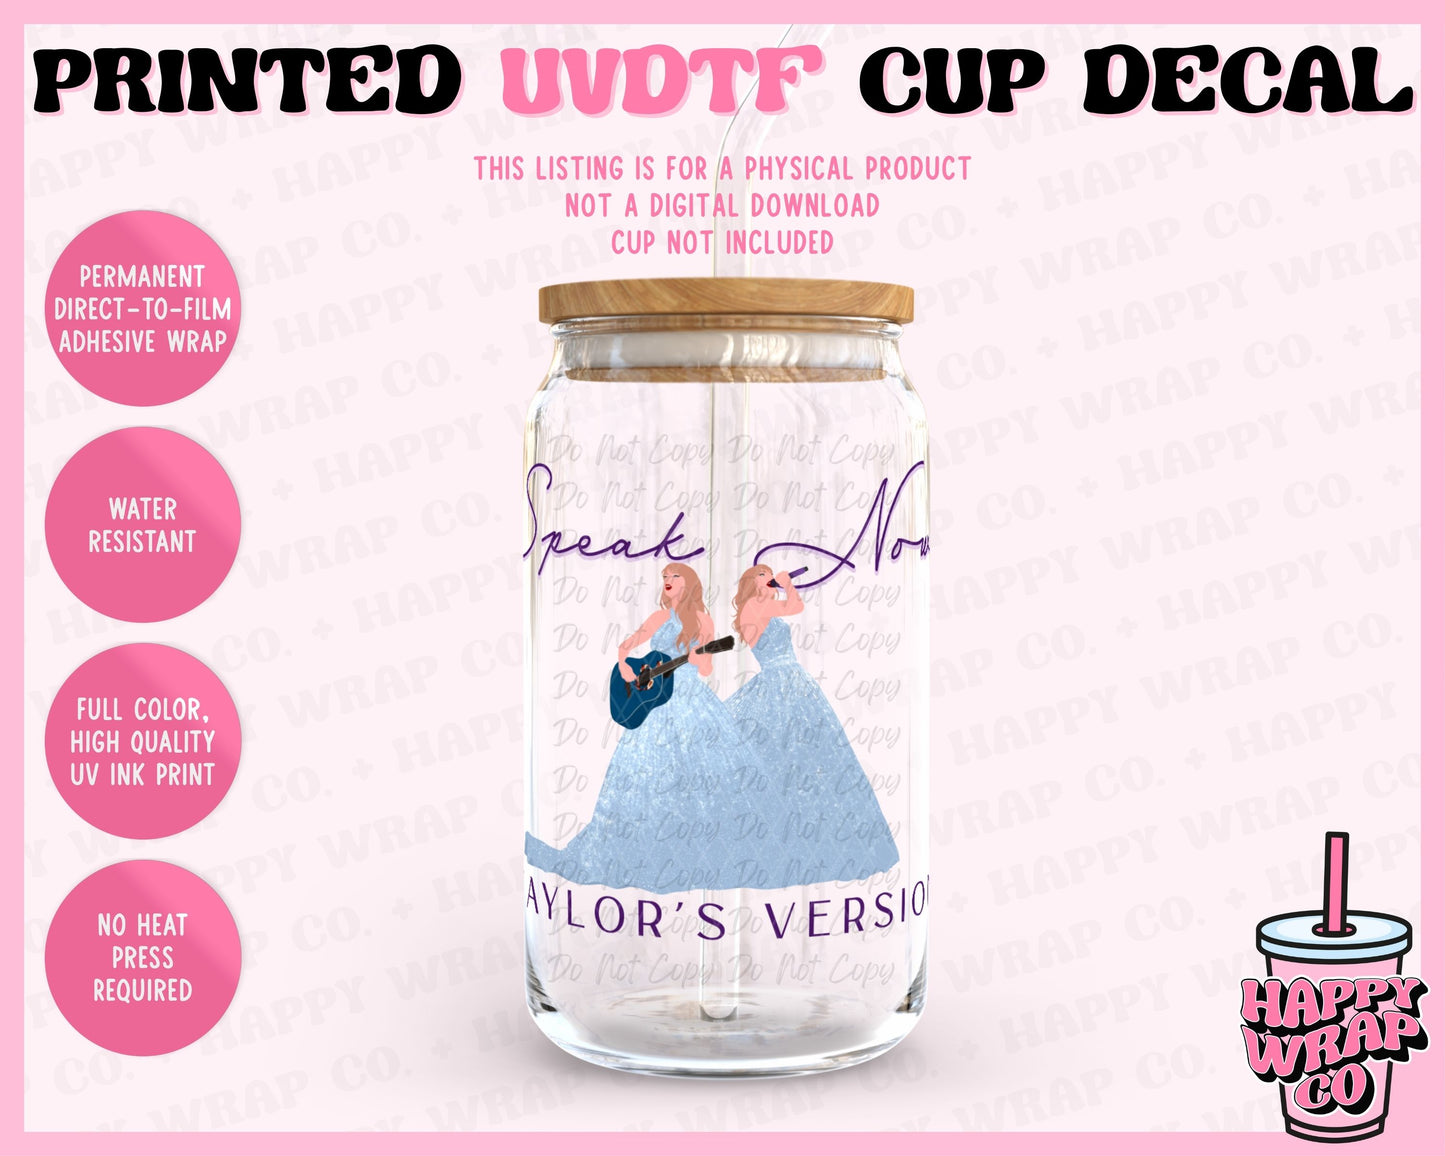 Speak Now TV Blue Dress - UVDTF Cup Decal (Ready-to-Ship)